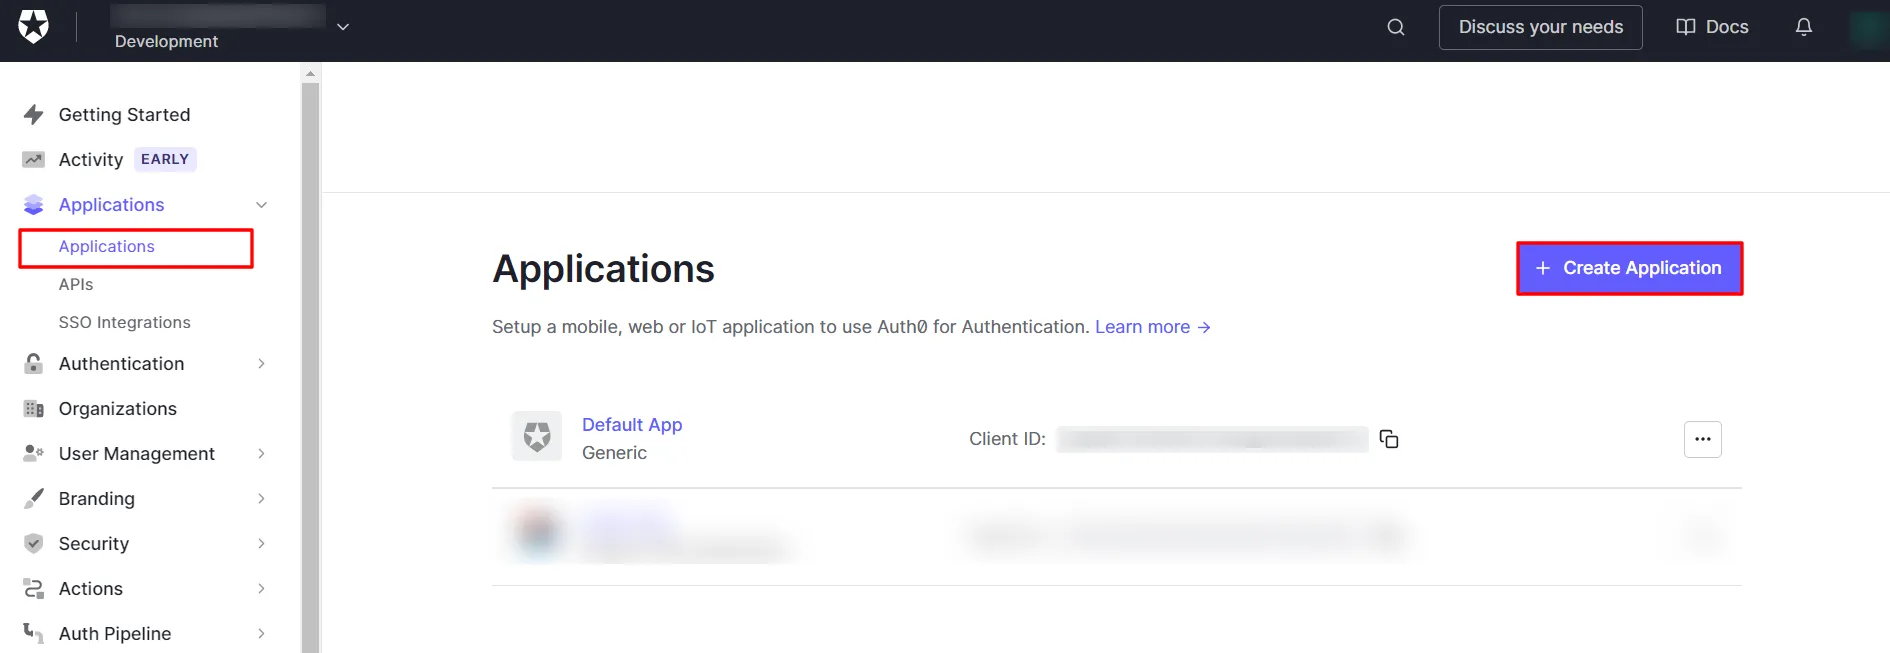 Single Sign-On (SSO) create a new application in Auth0 